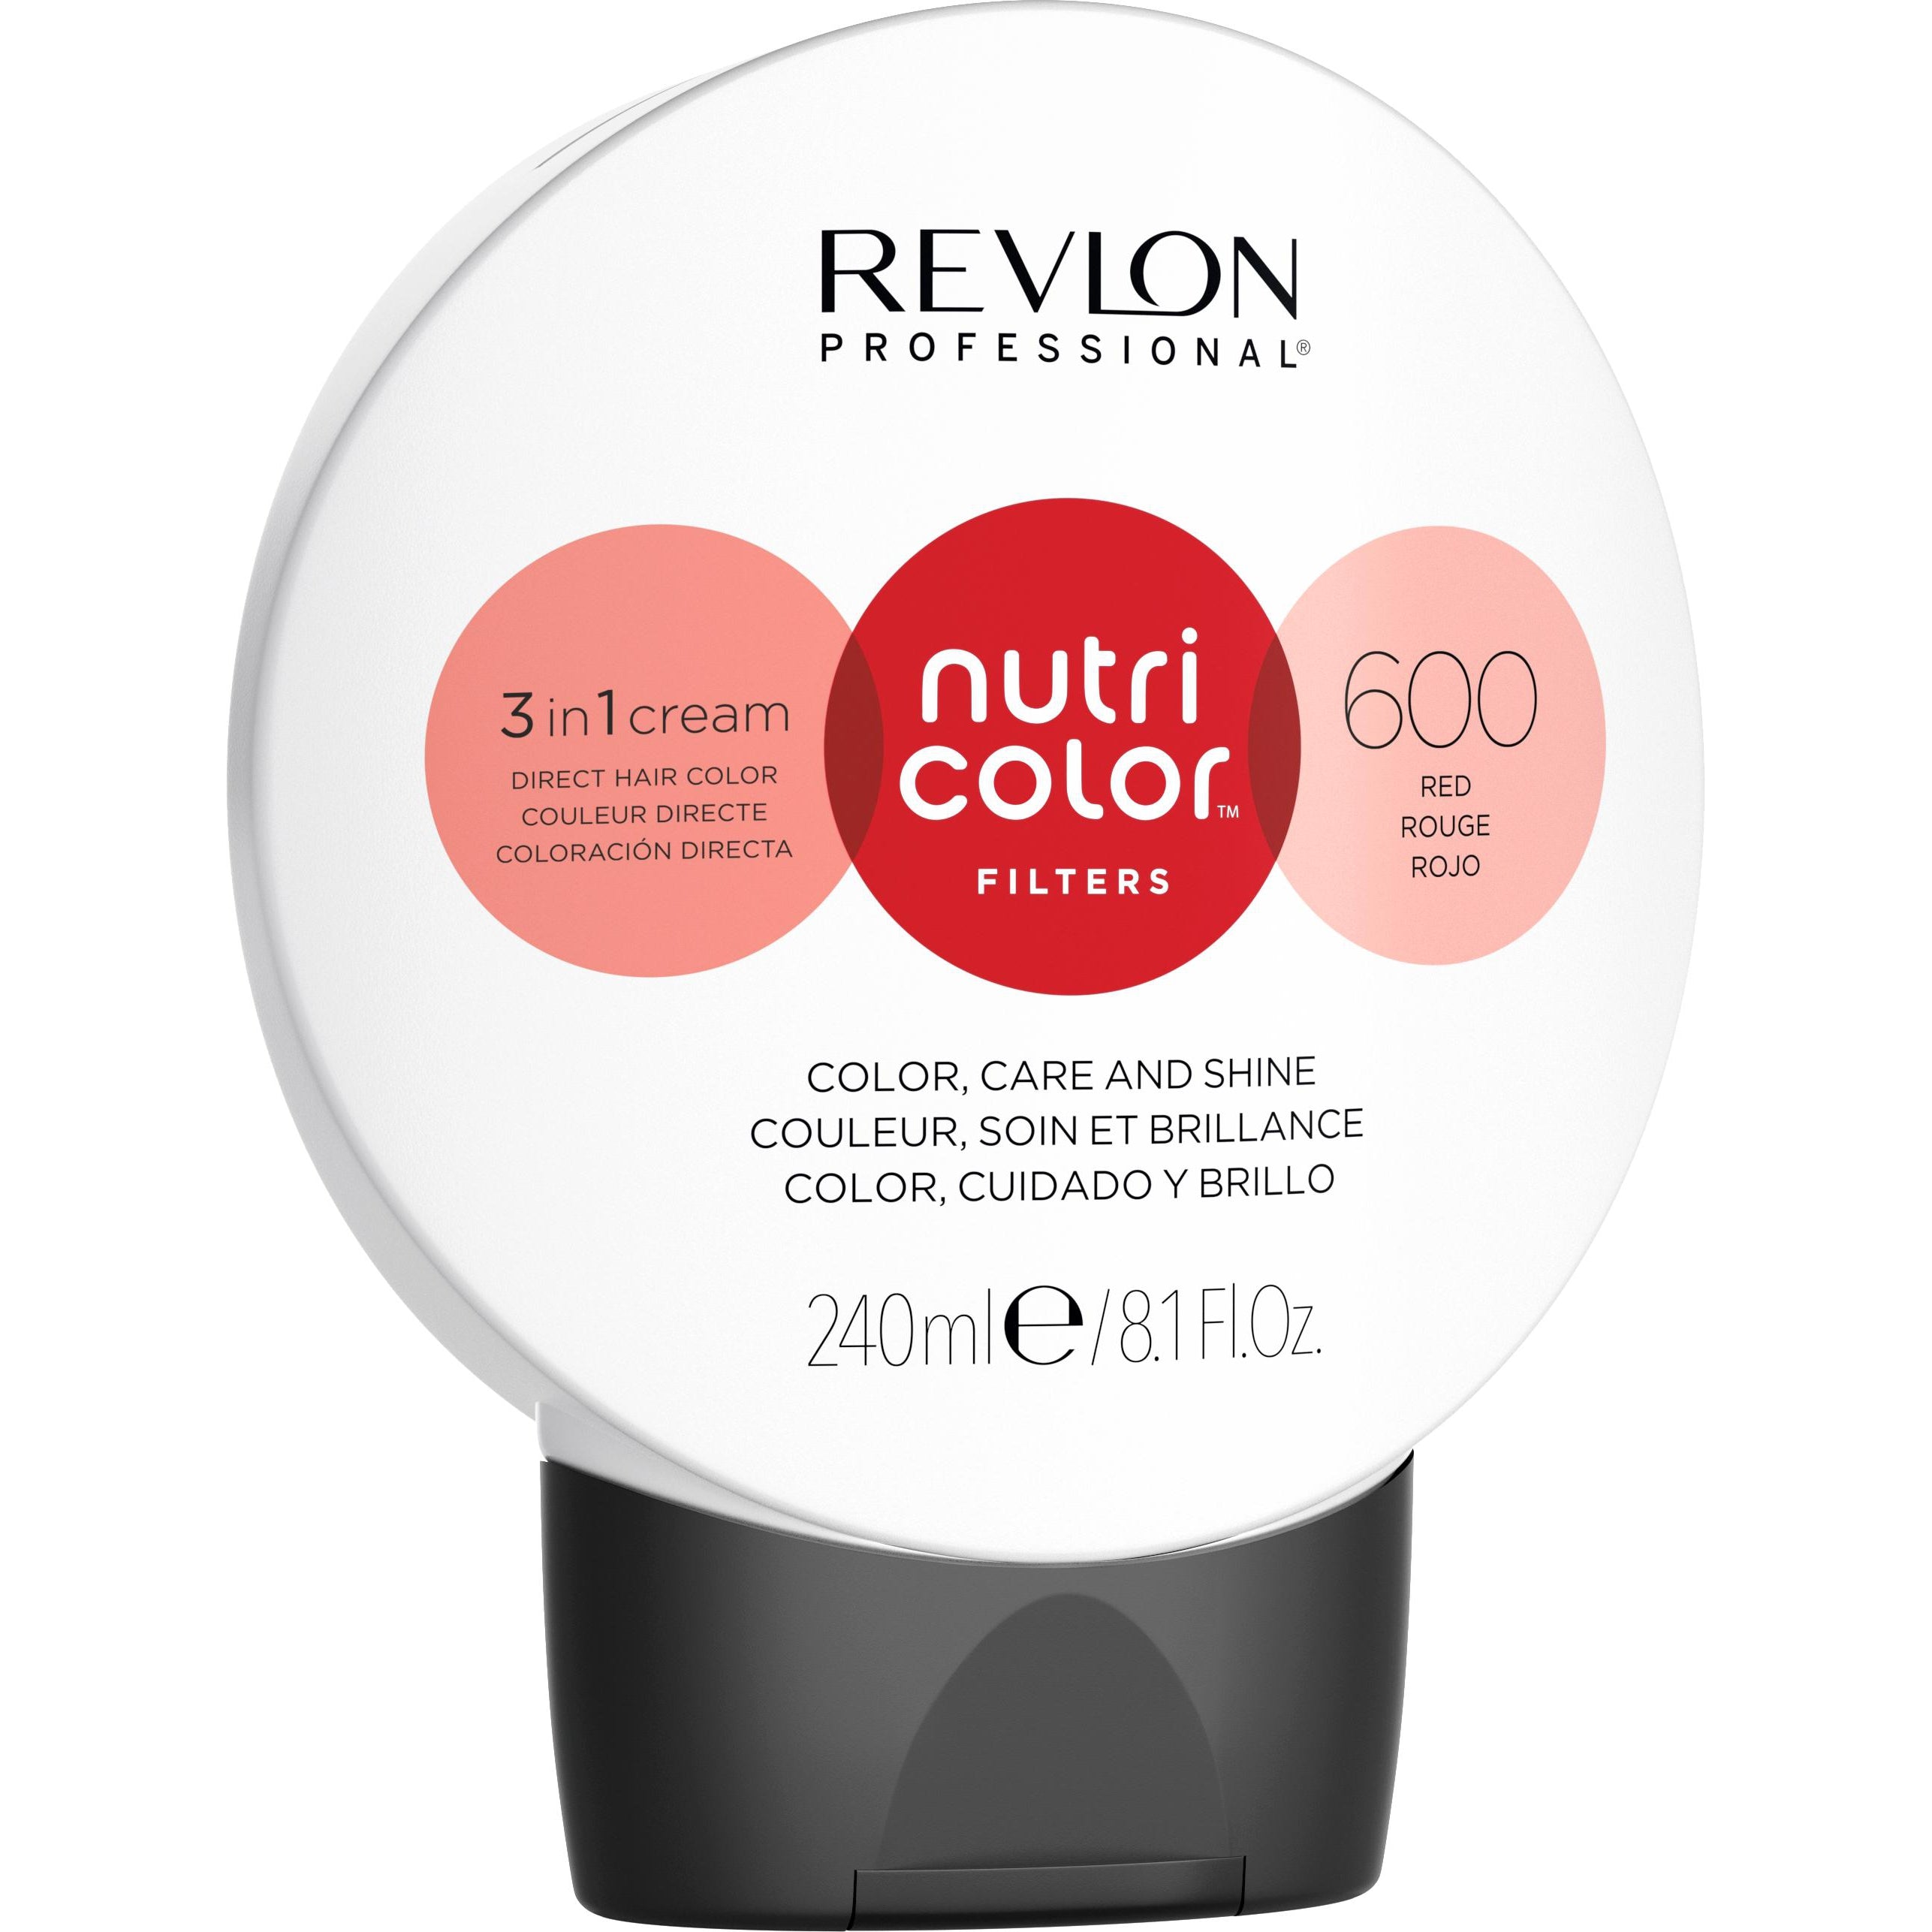 600 RED NUTRI COLOR CREME BALL